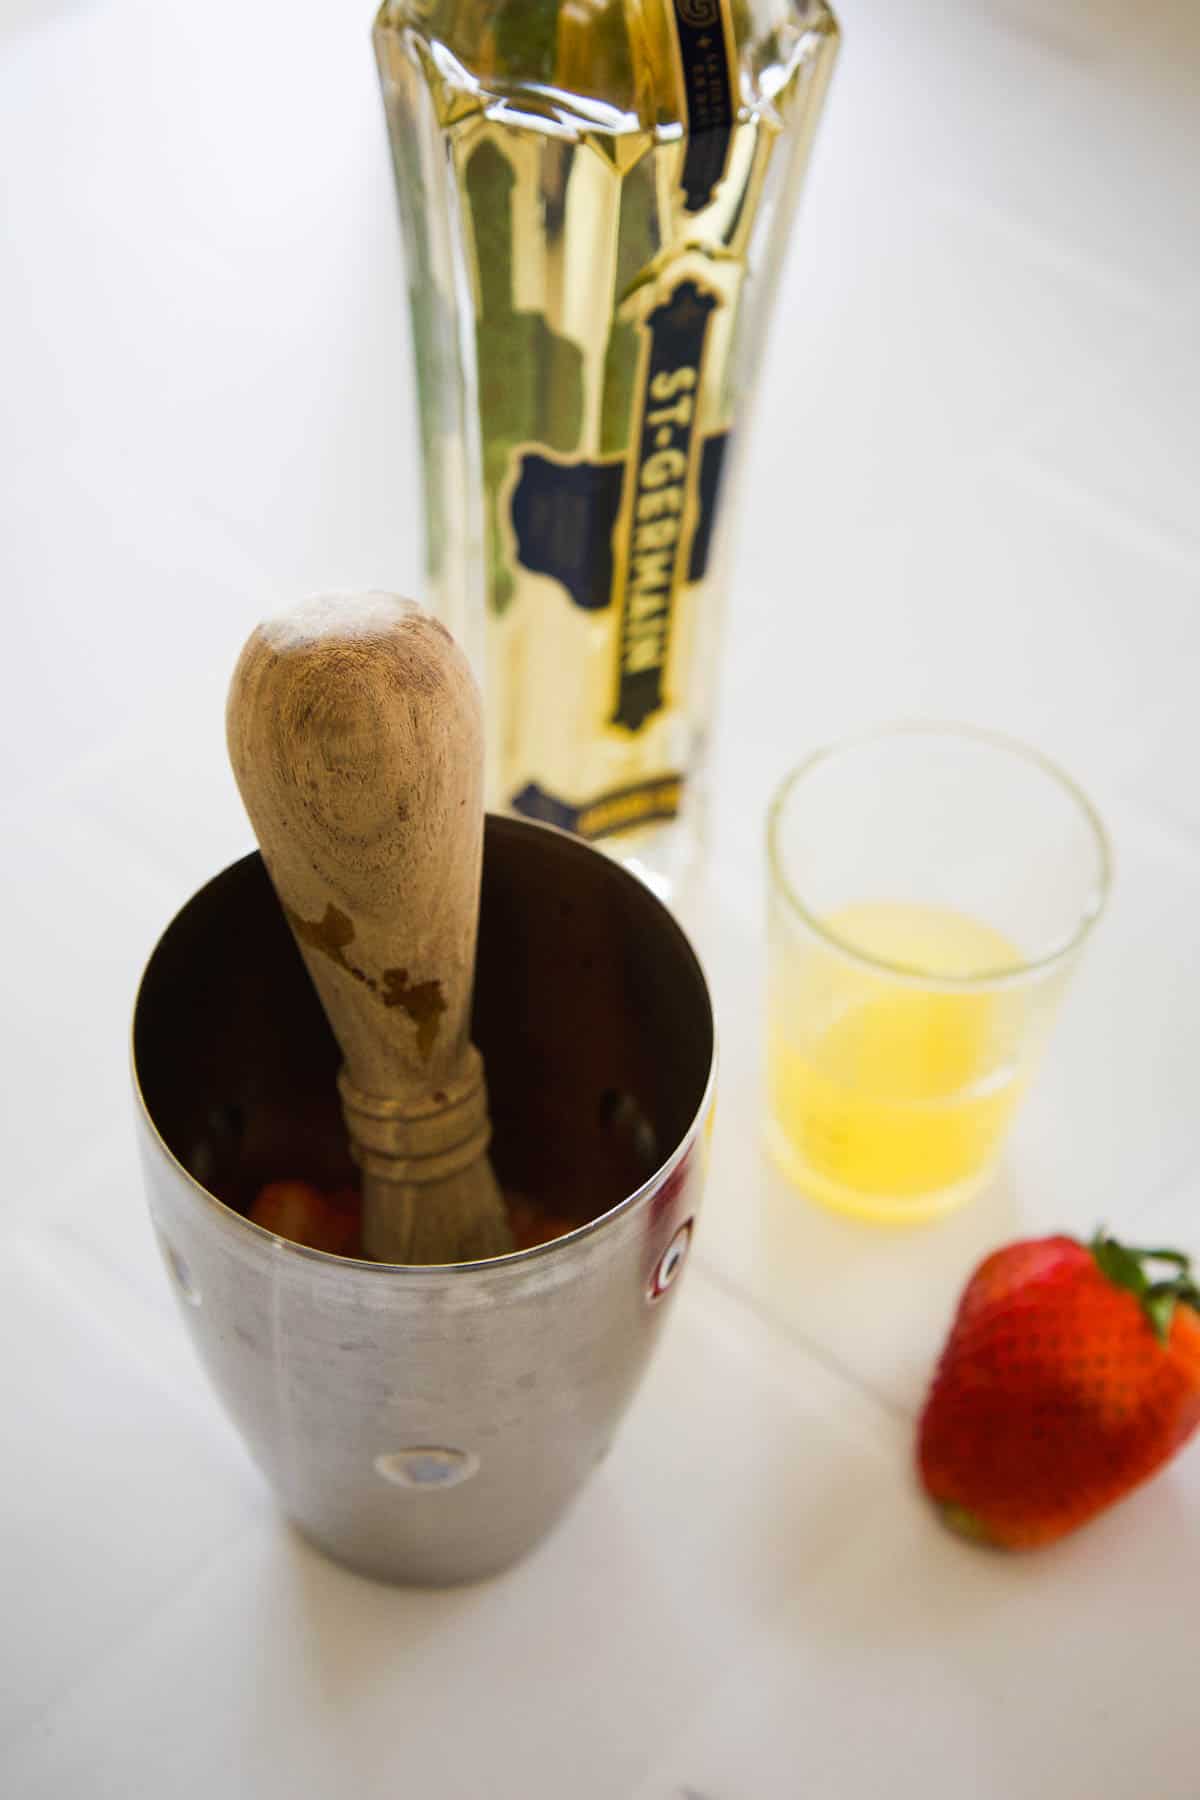 A cocktail shaker with a muddler in it next to a St Germain bottle, a measuring cup with lemon juice and a strawberry.